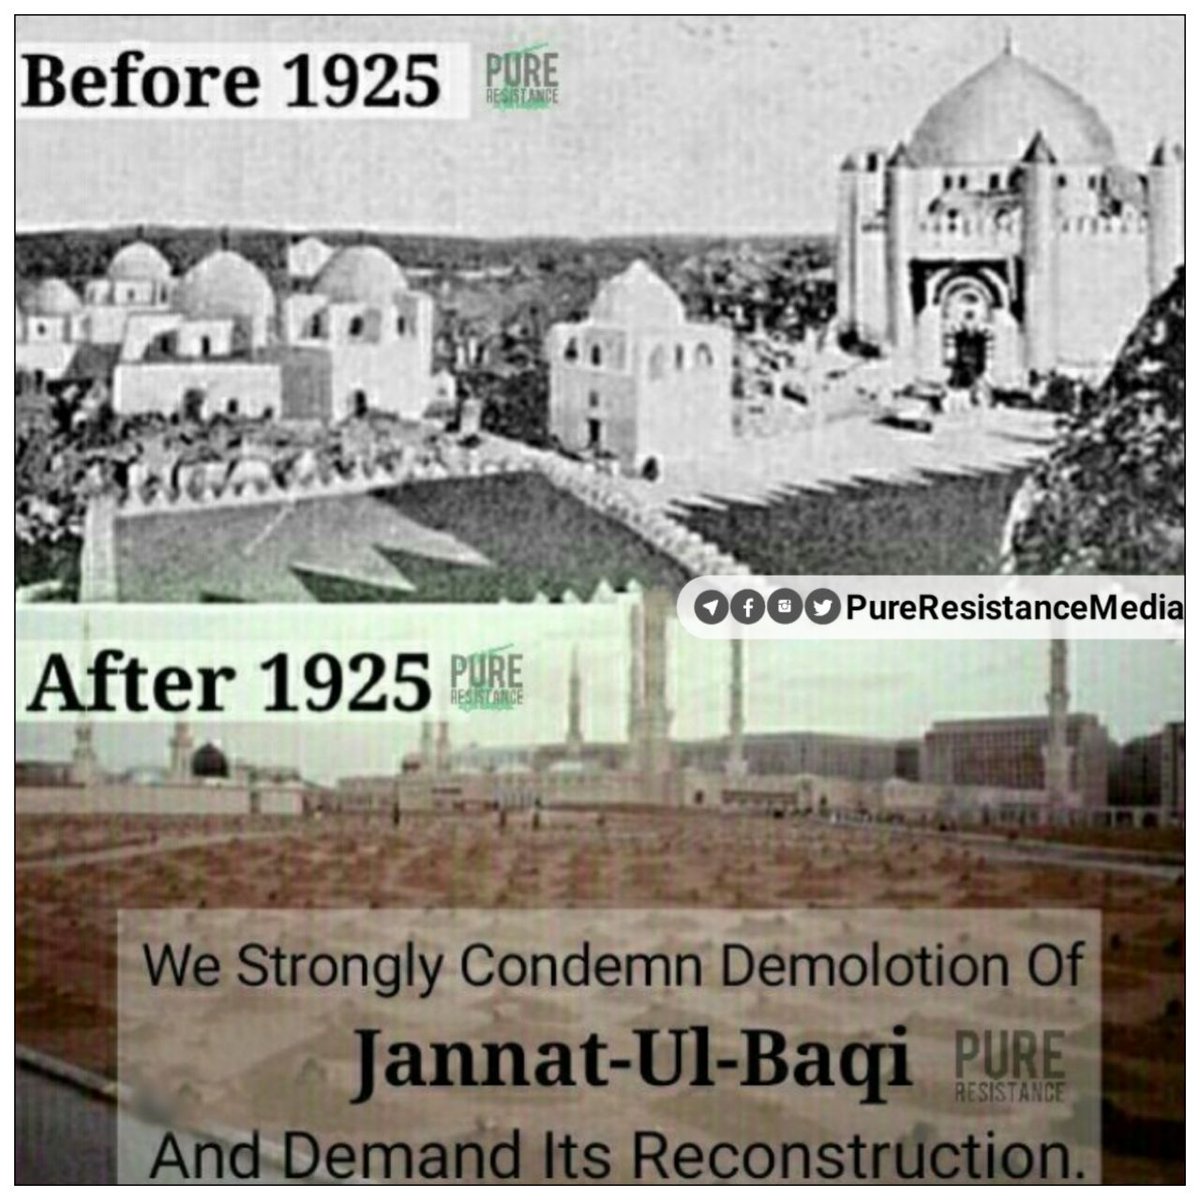 Jannat Ul Baqi - Before And After 1925 !!

We Strongly Condemn Demolition Of Jannat-Ul-Baqi And Demand Its Reconstruction.

#DeathToAalESaud #RebuildBaqi